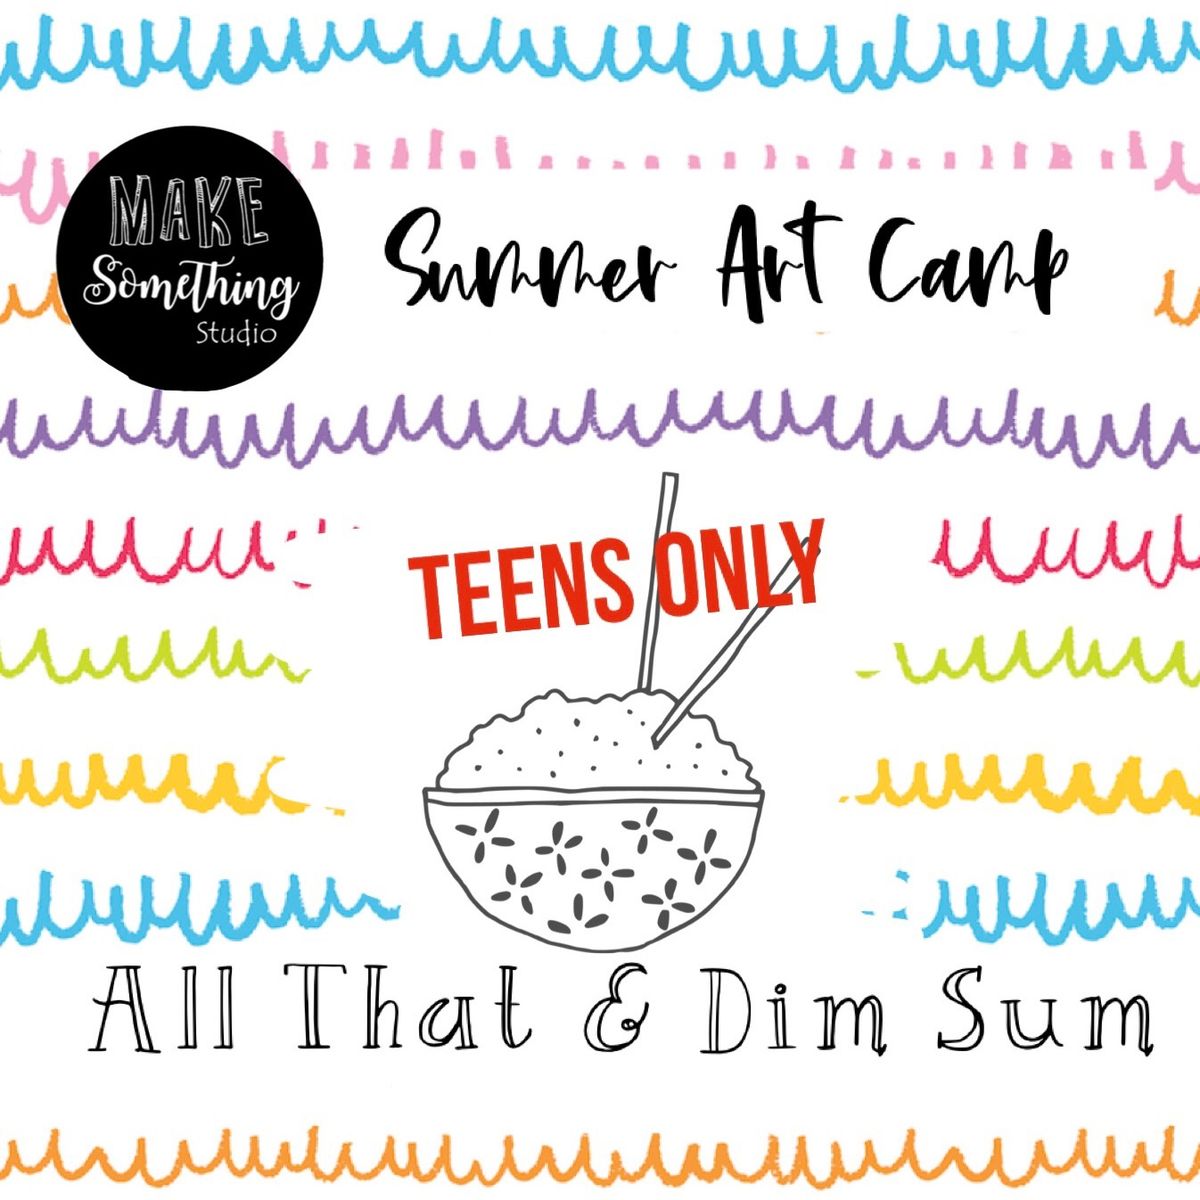 TEENS ONLY: All that and Dim Sum